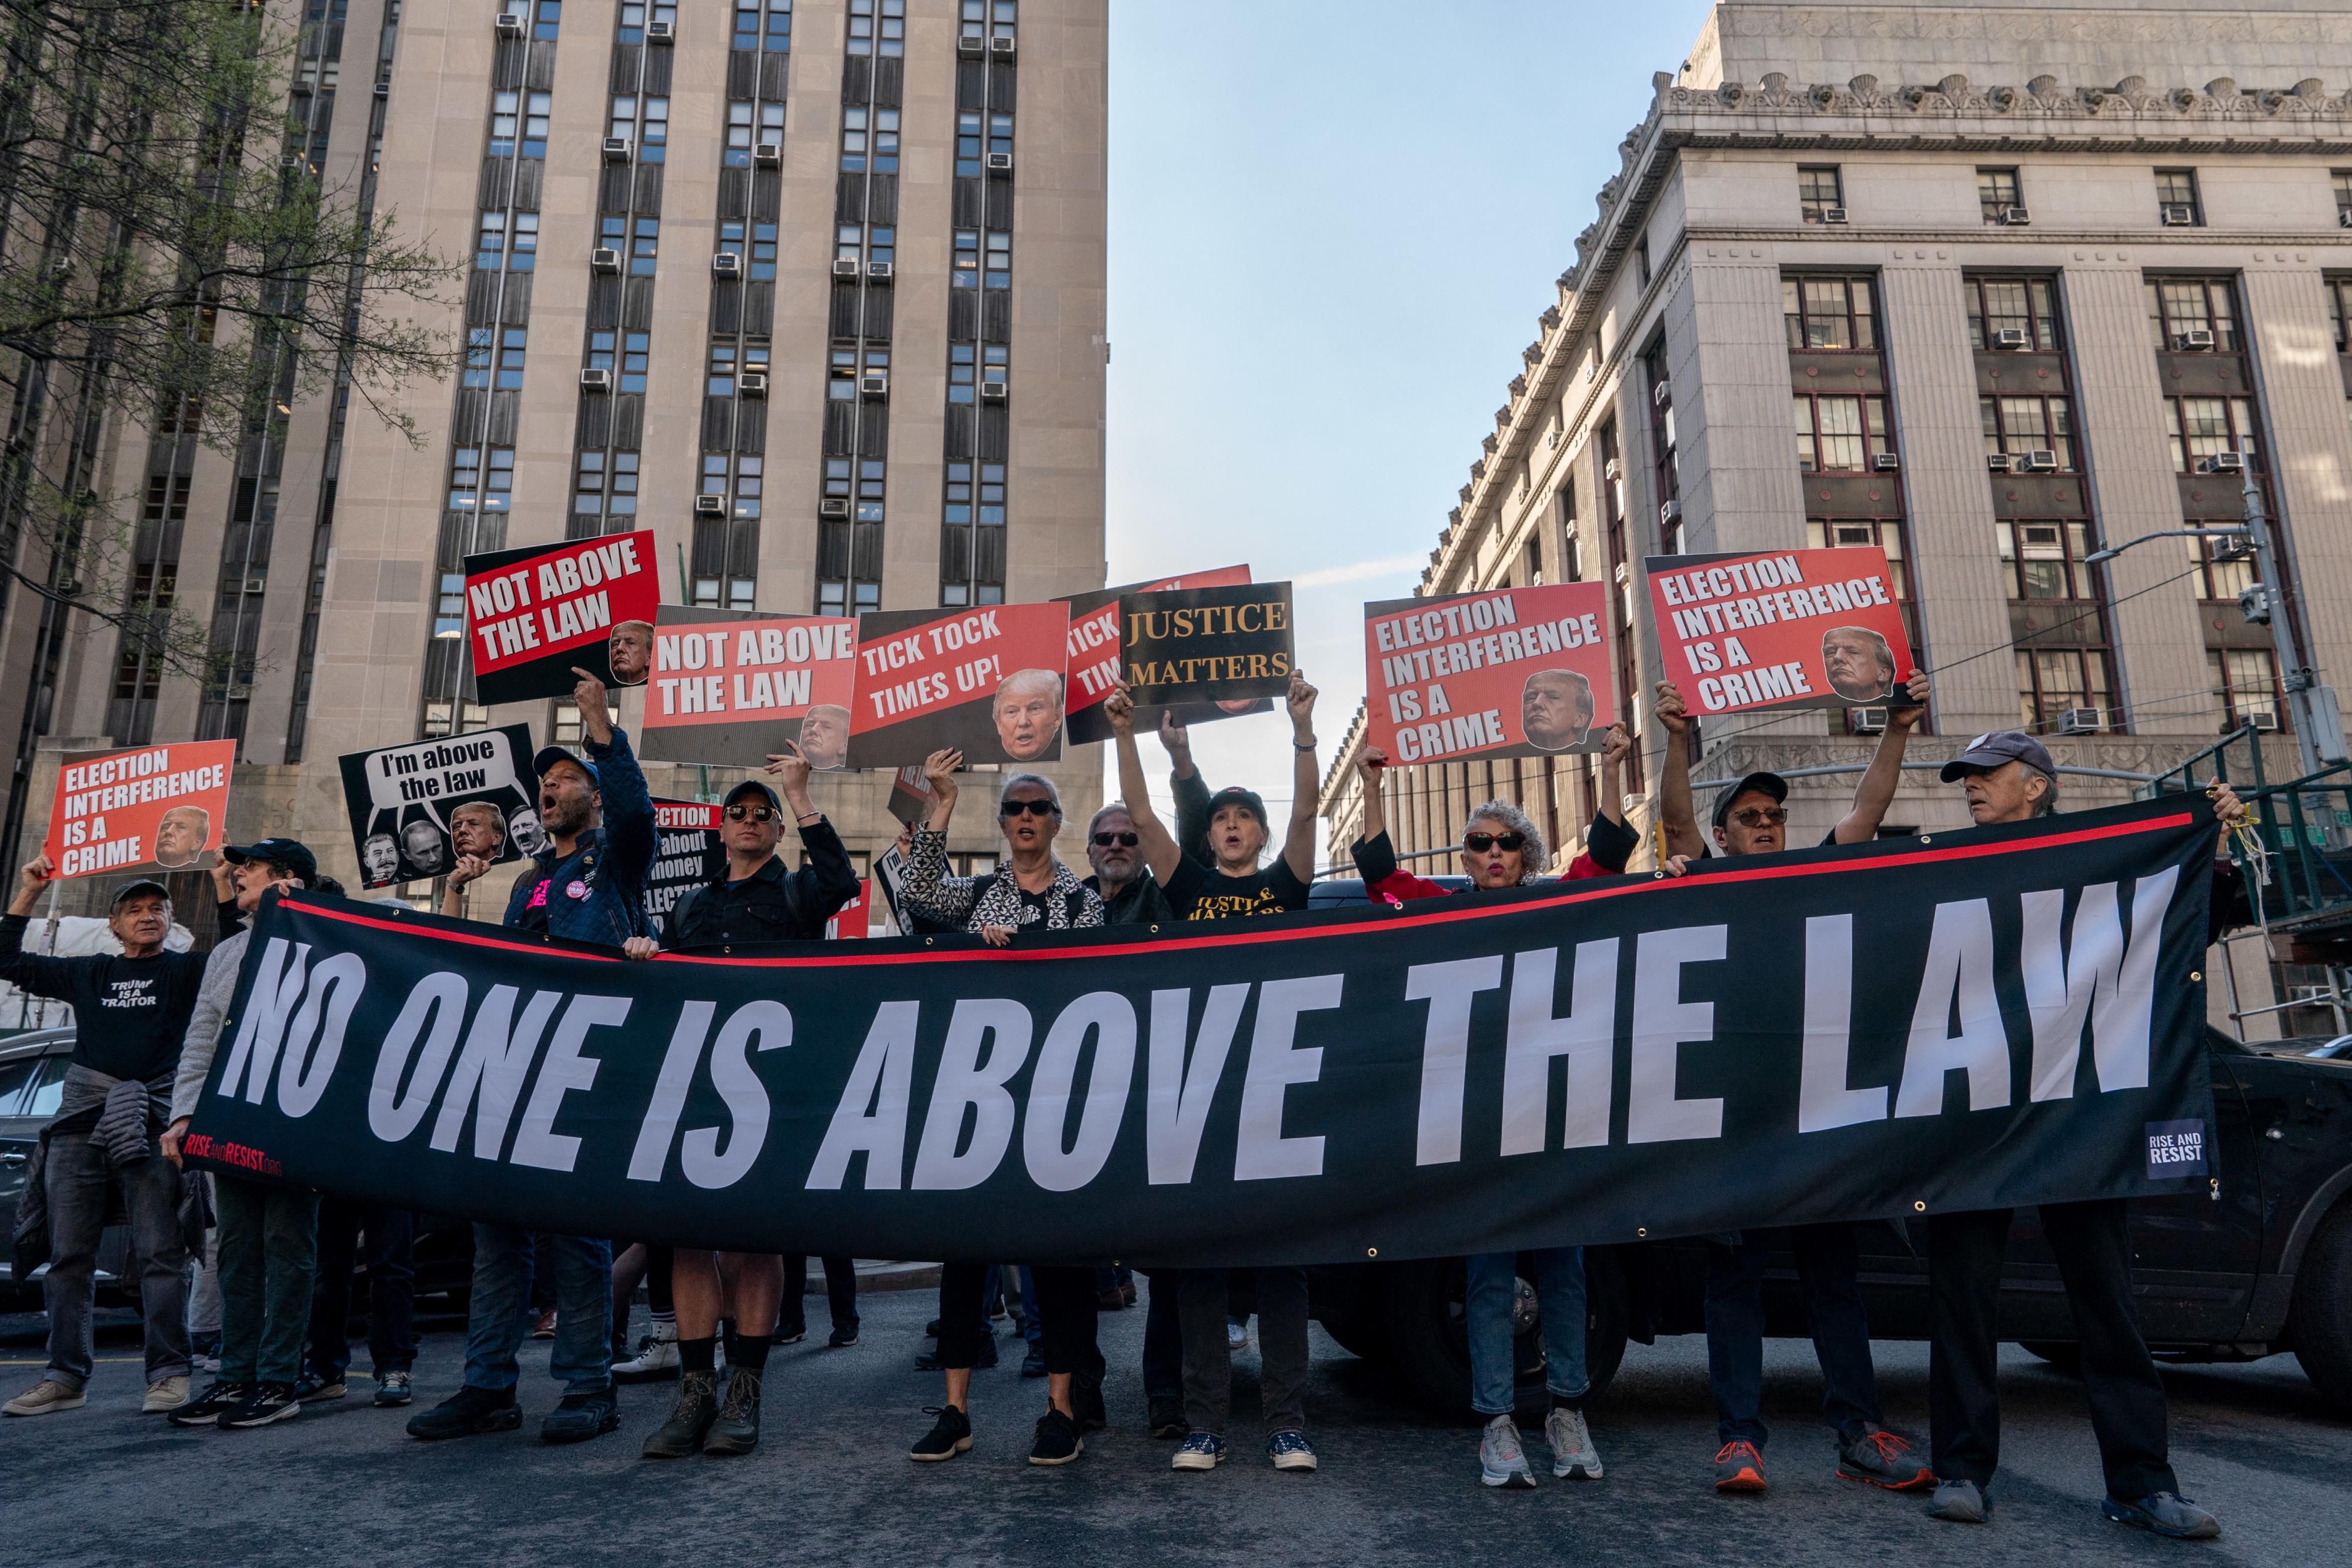 Group of people holding signs and a large banner that reads &quot;NO ONE IS ABOVE THE LAW&quot; during a demonstration